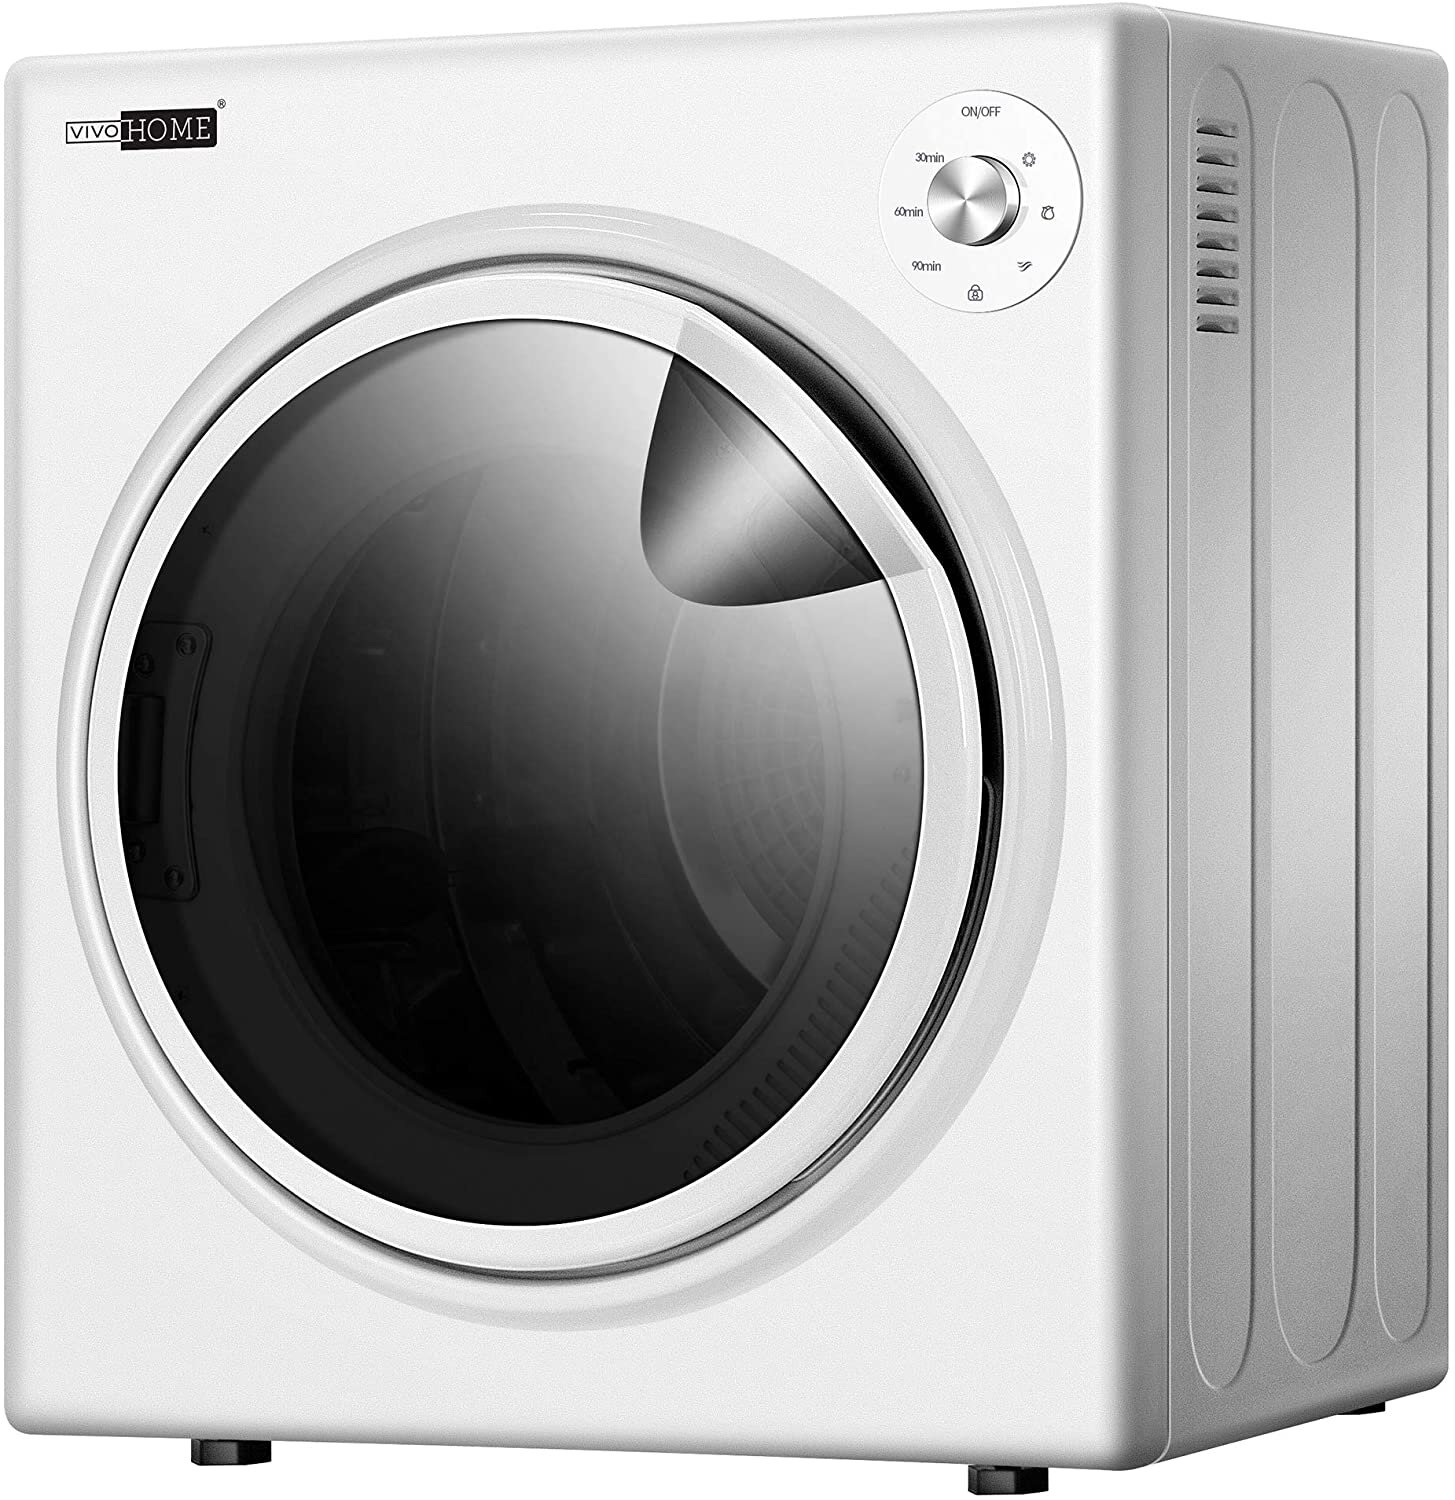 Himimi Delia 2.1 Cubic Feet cu. ft. High Efficiency Portable Washer in  White/Black with Child Safety Lock